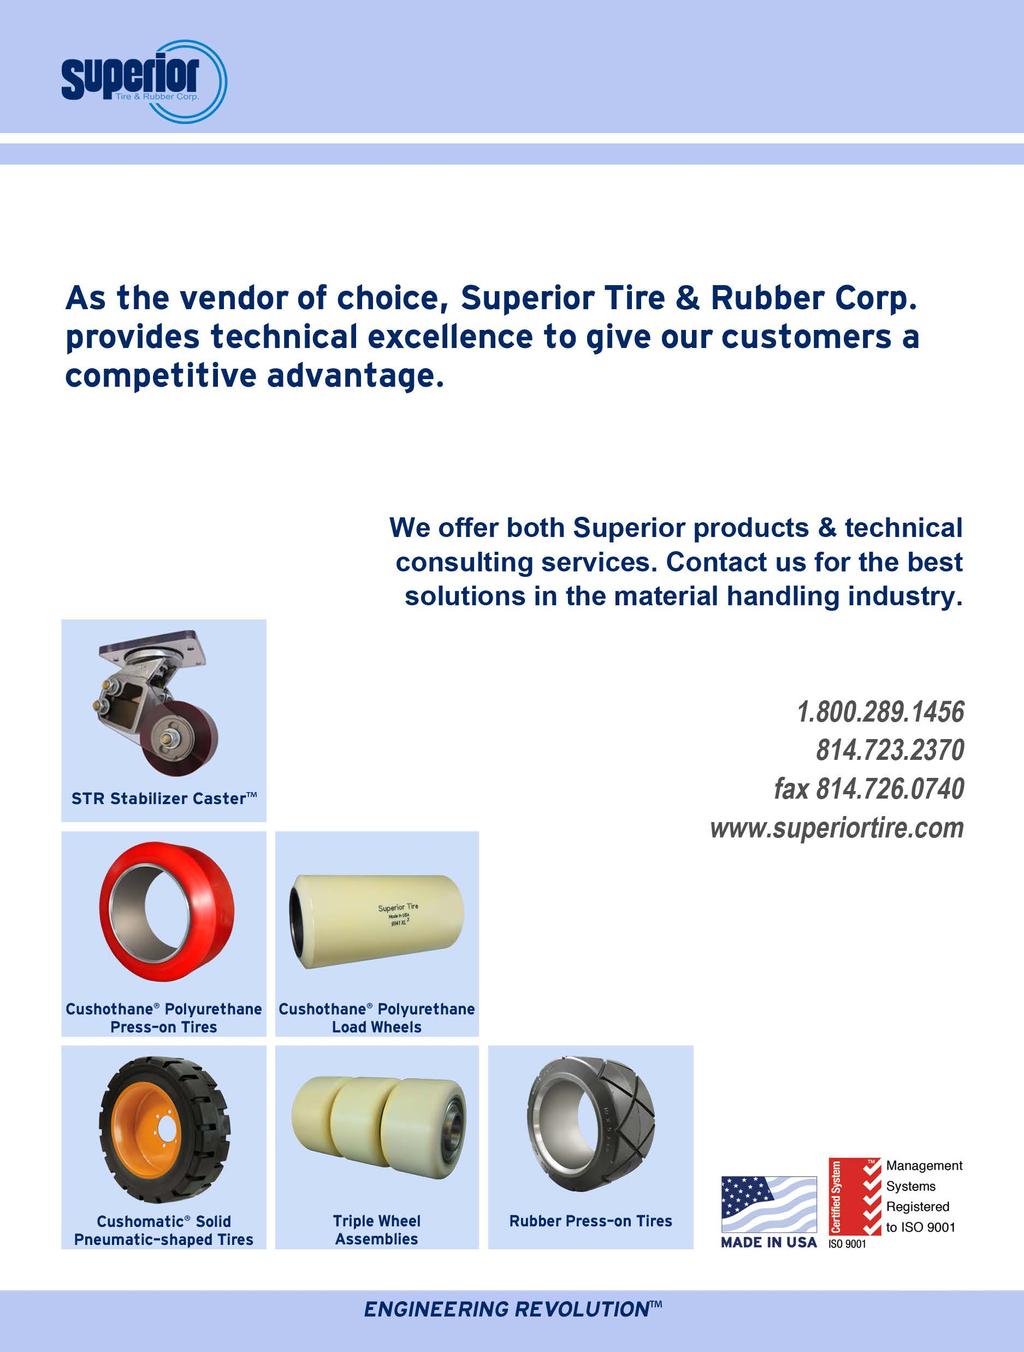 As the vendor of choice, Superior Tire & Rubber Corp. provides technical excellence to give our customers a competitive advantage. We offer both Superior products & technical consulting services.